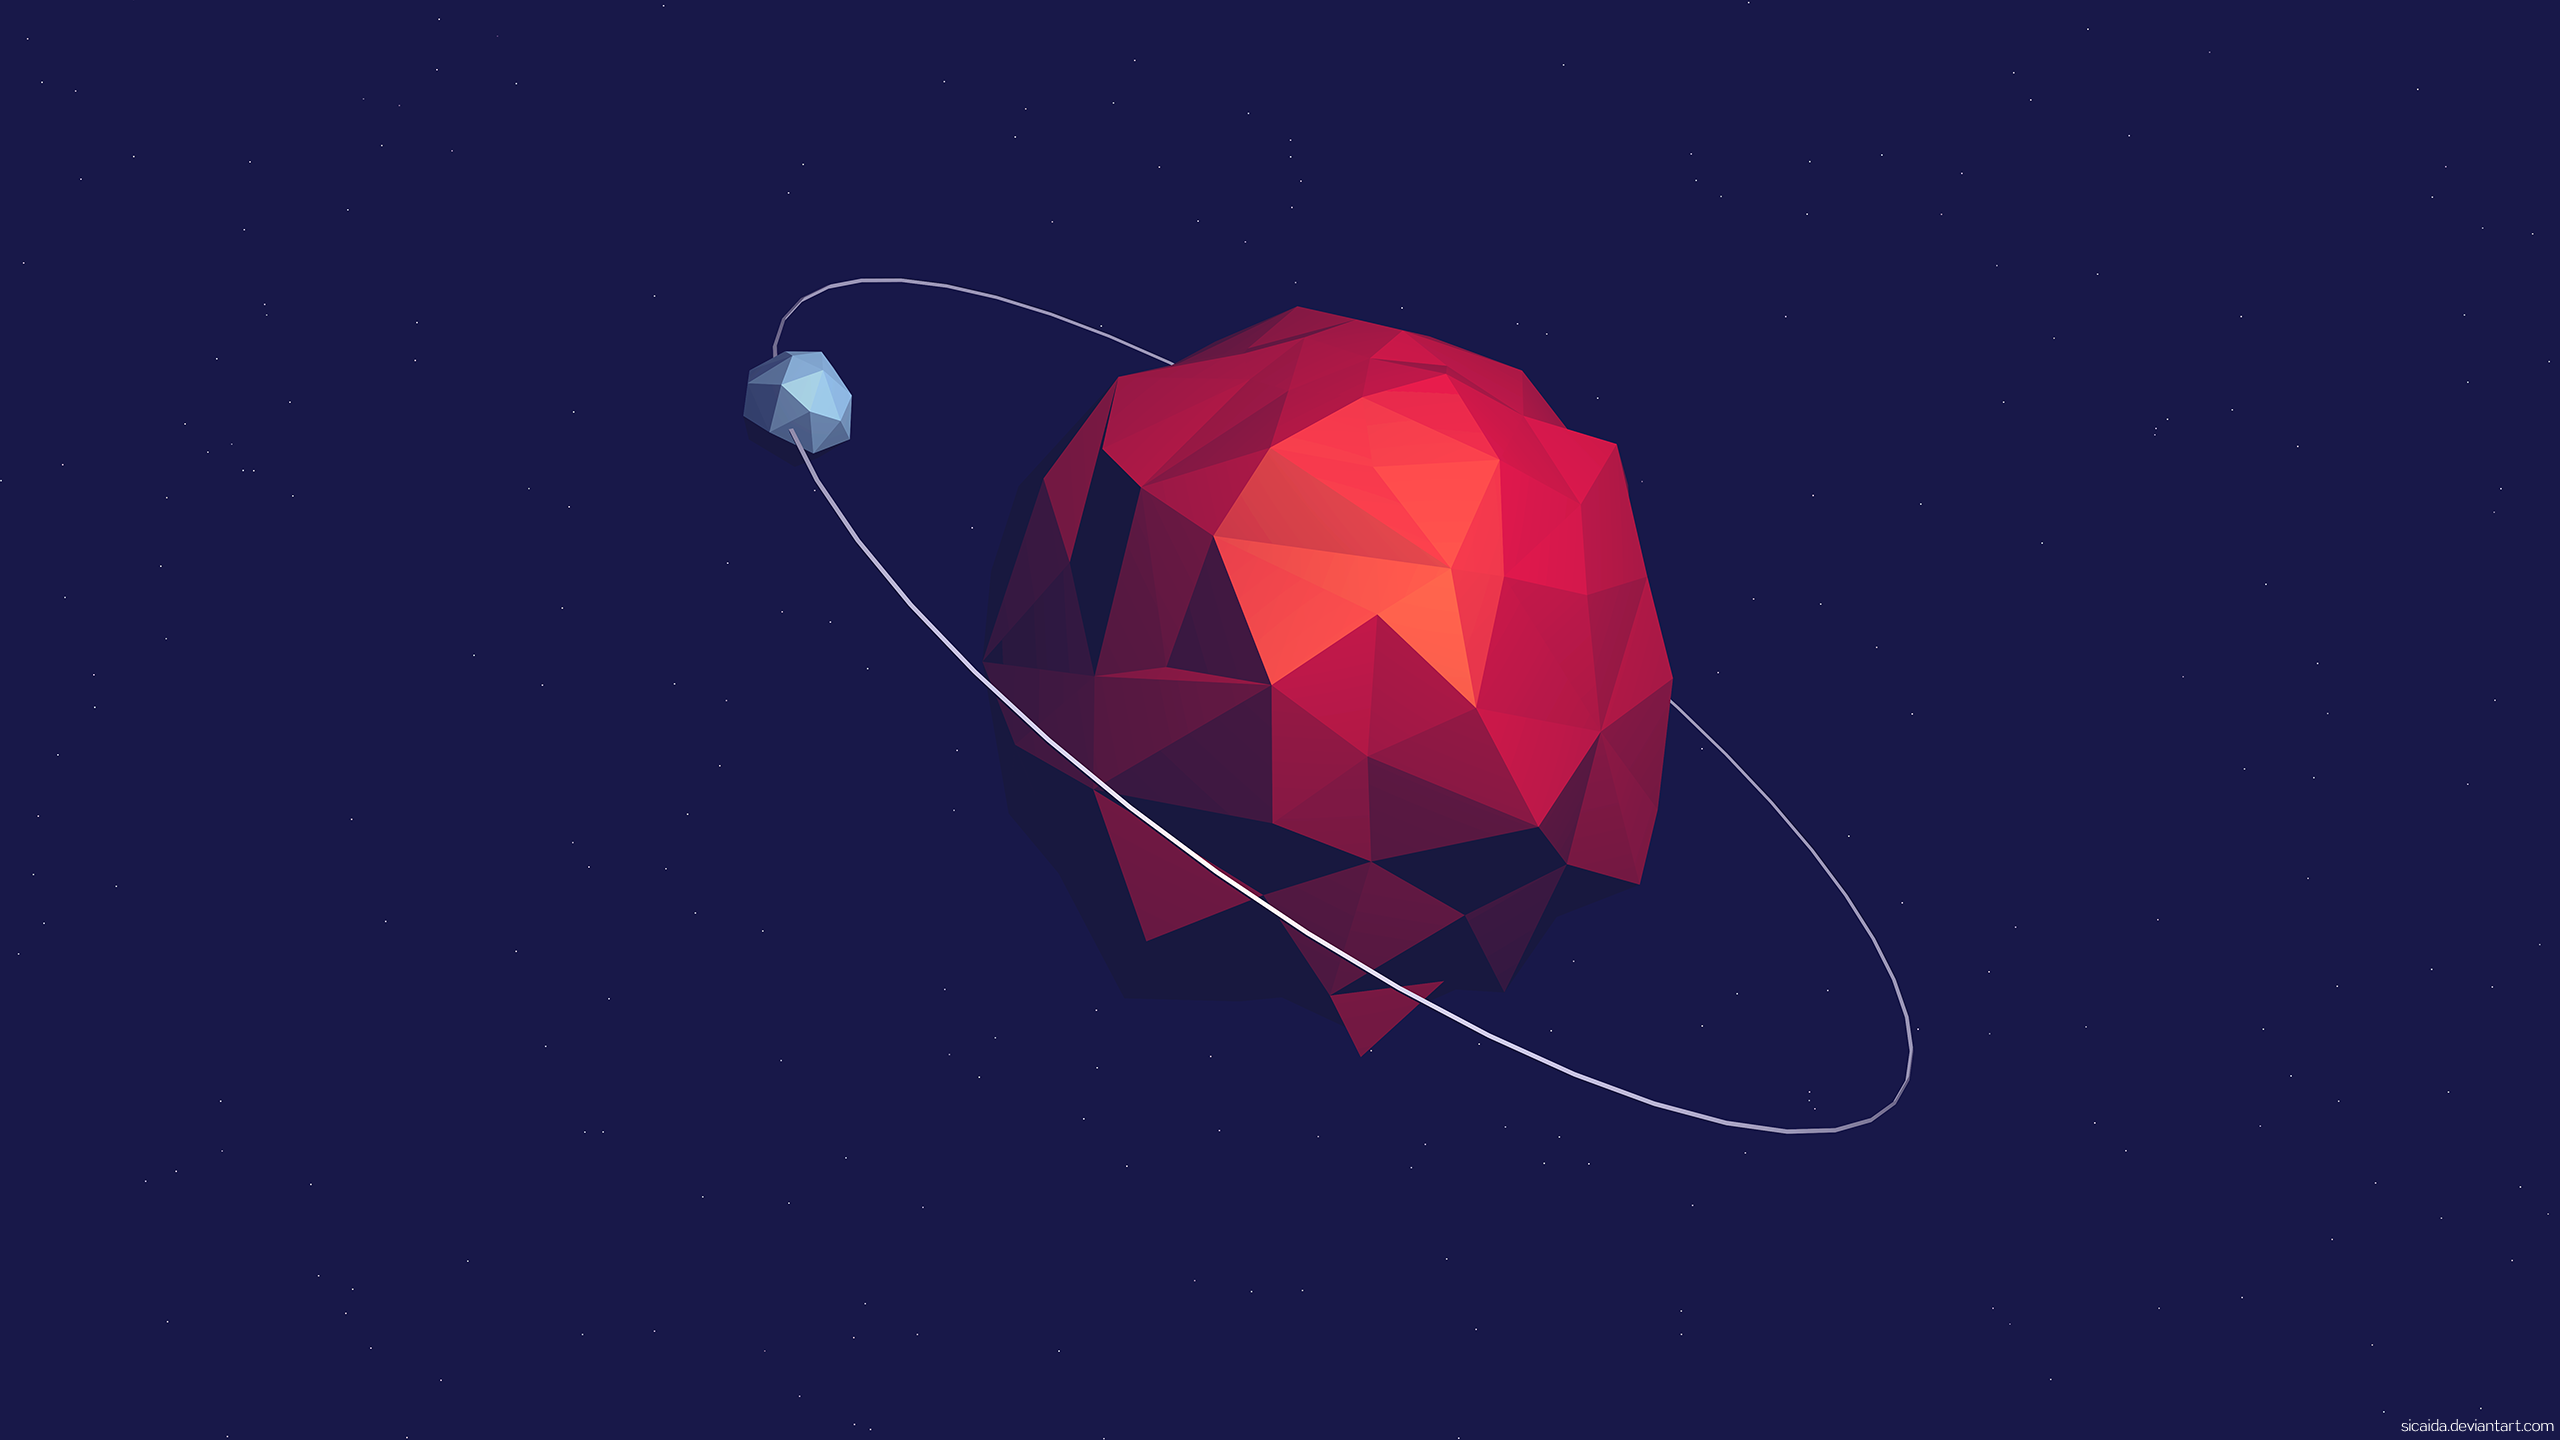 Minimalism Artwork Abstract Digital Art Simple Background Low Poly Space Space Art Hydrogen 2560x1440